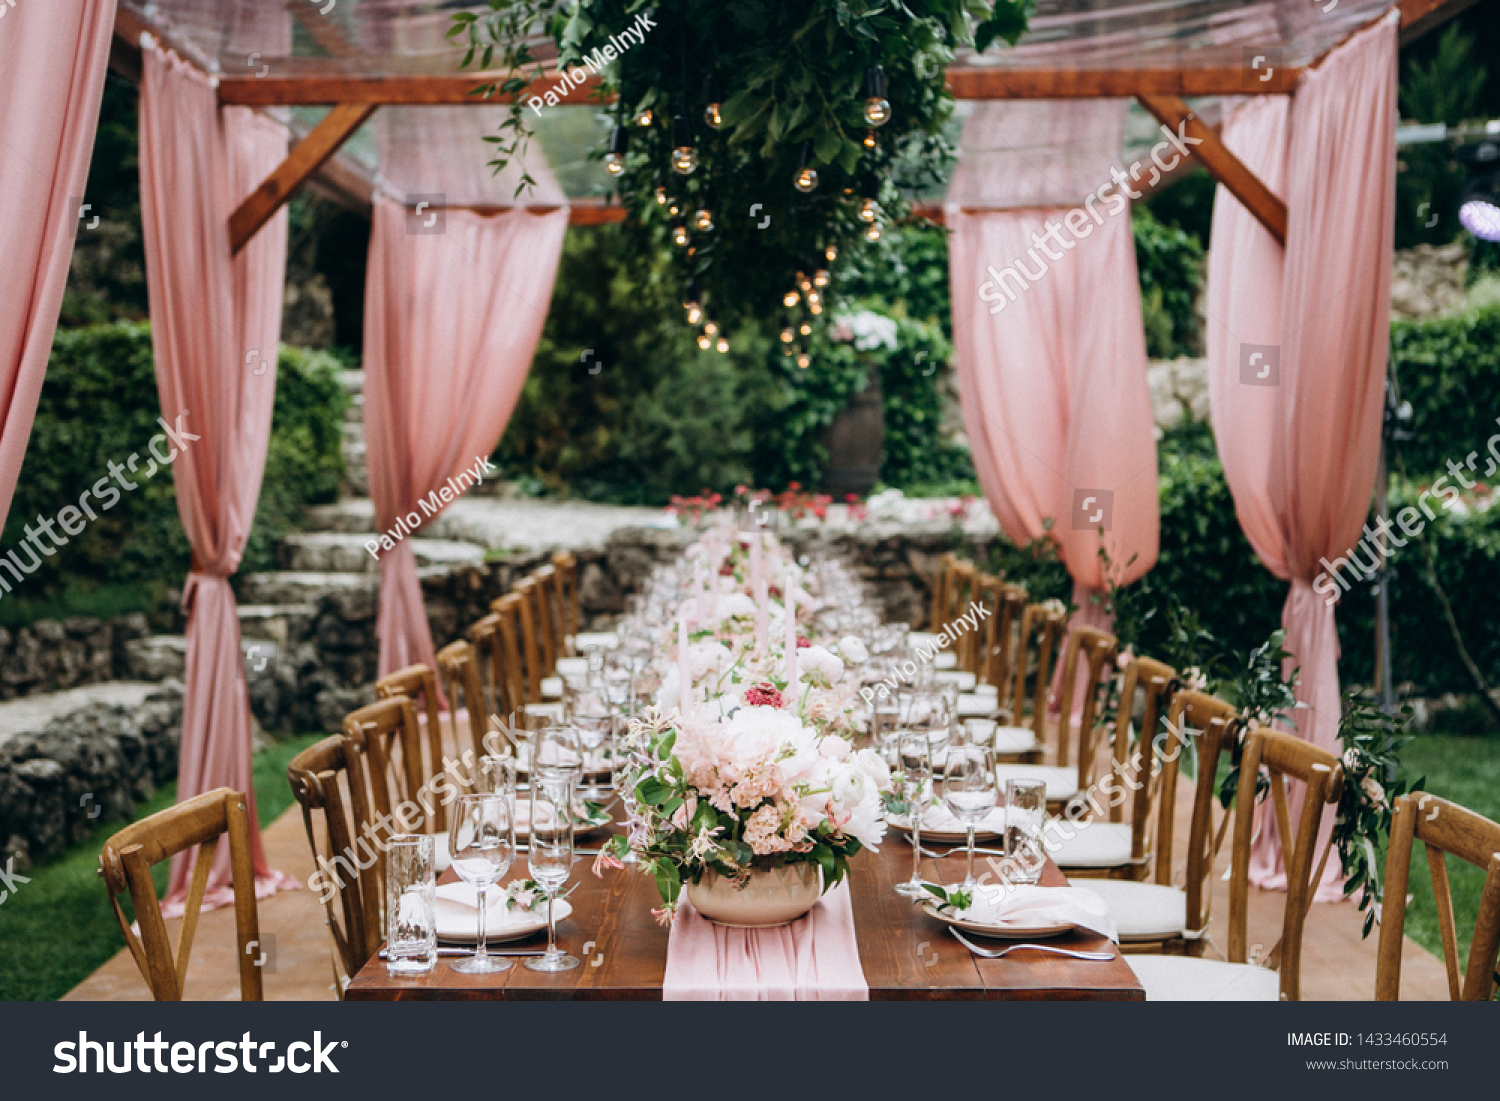 Wedding table decoration and floral design #1433460554